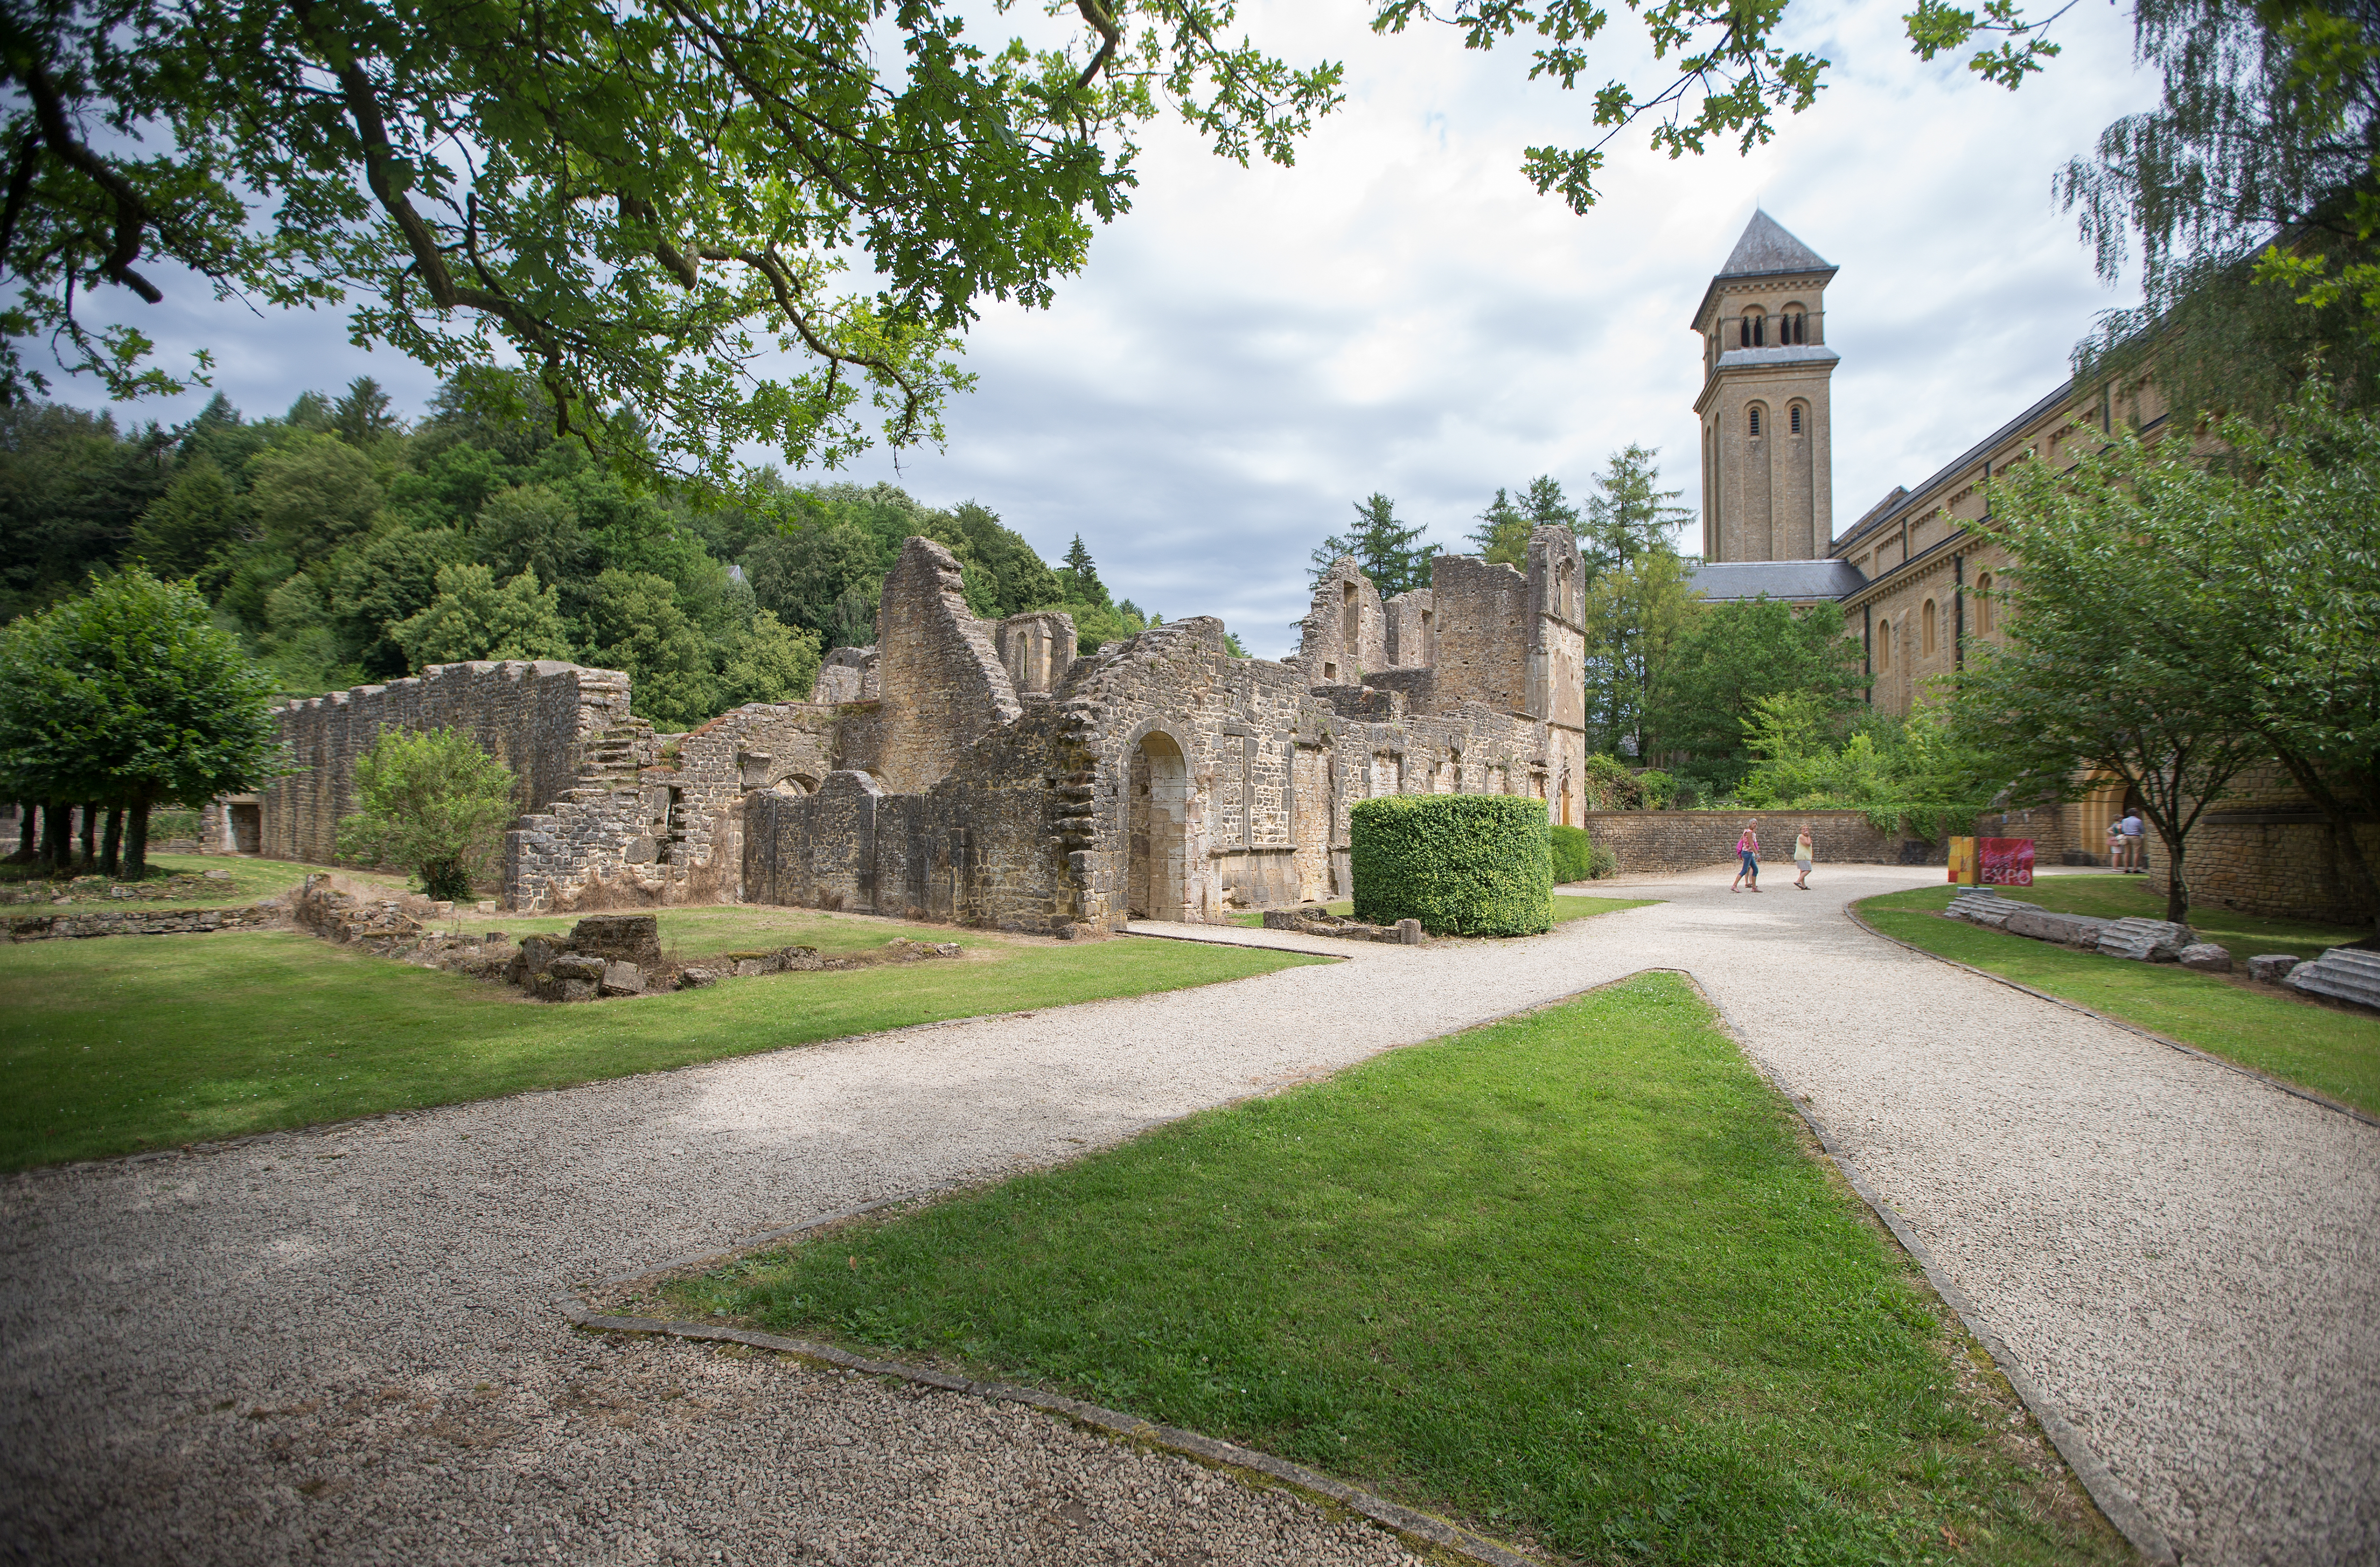 Come and discover the celebrated Notre-Dame d'Orval abbey in Florenville